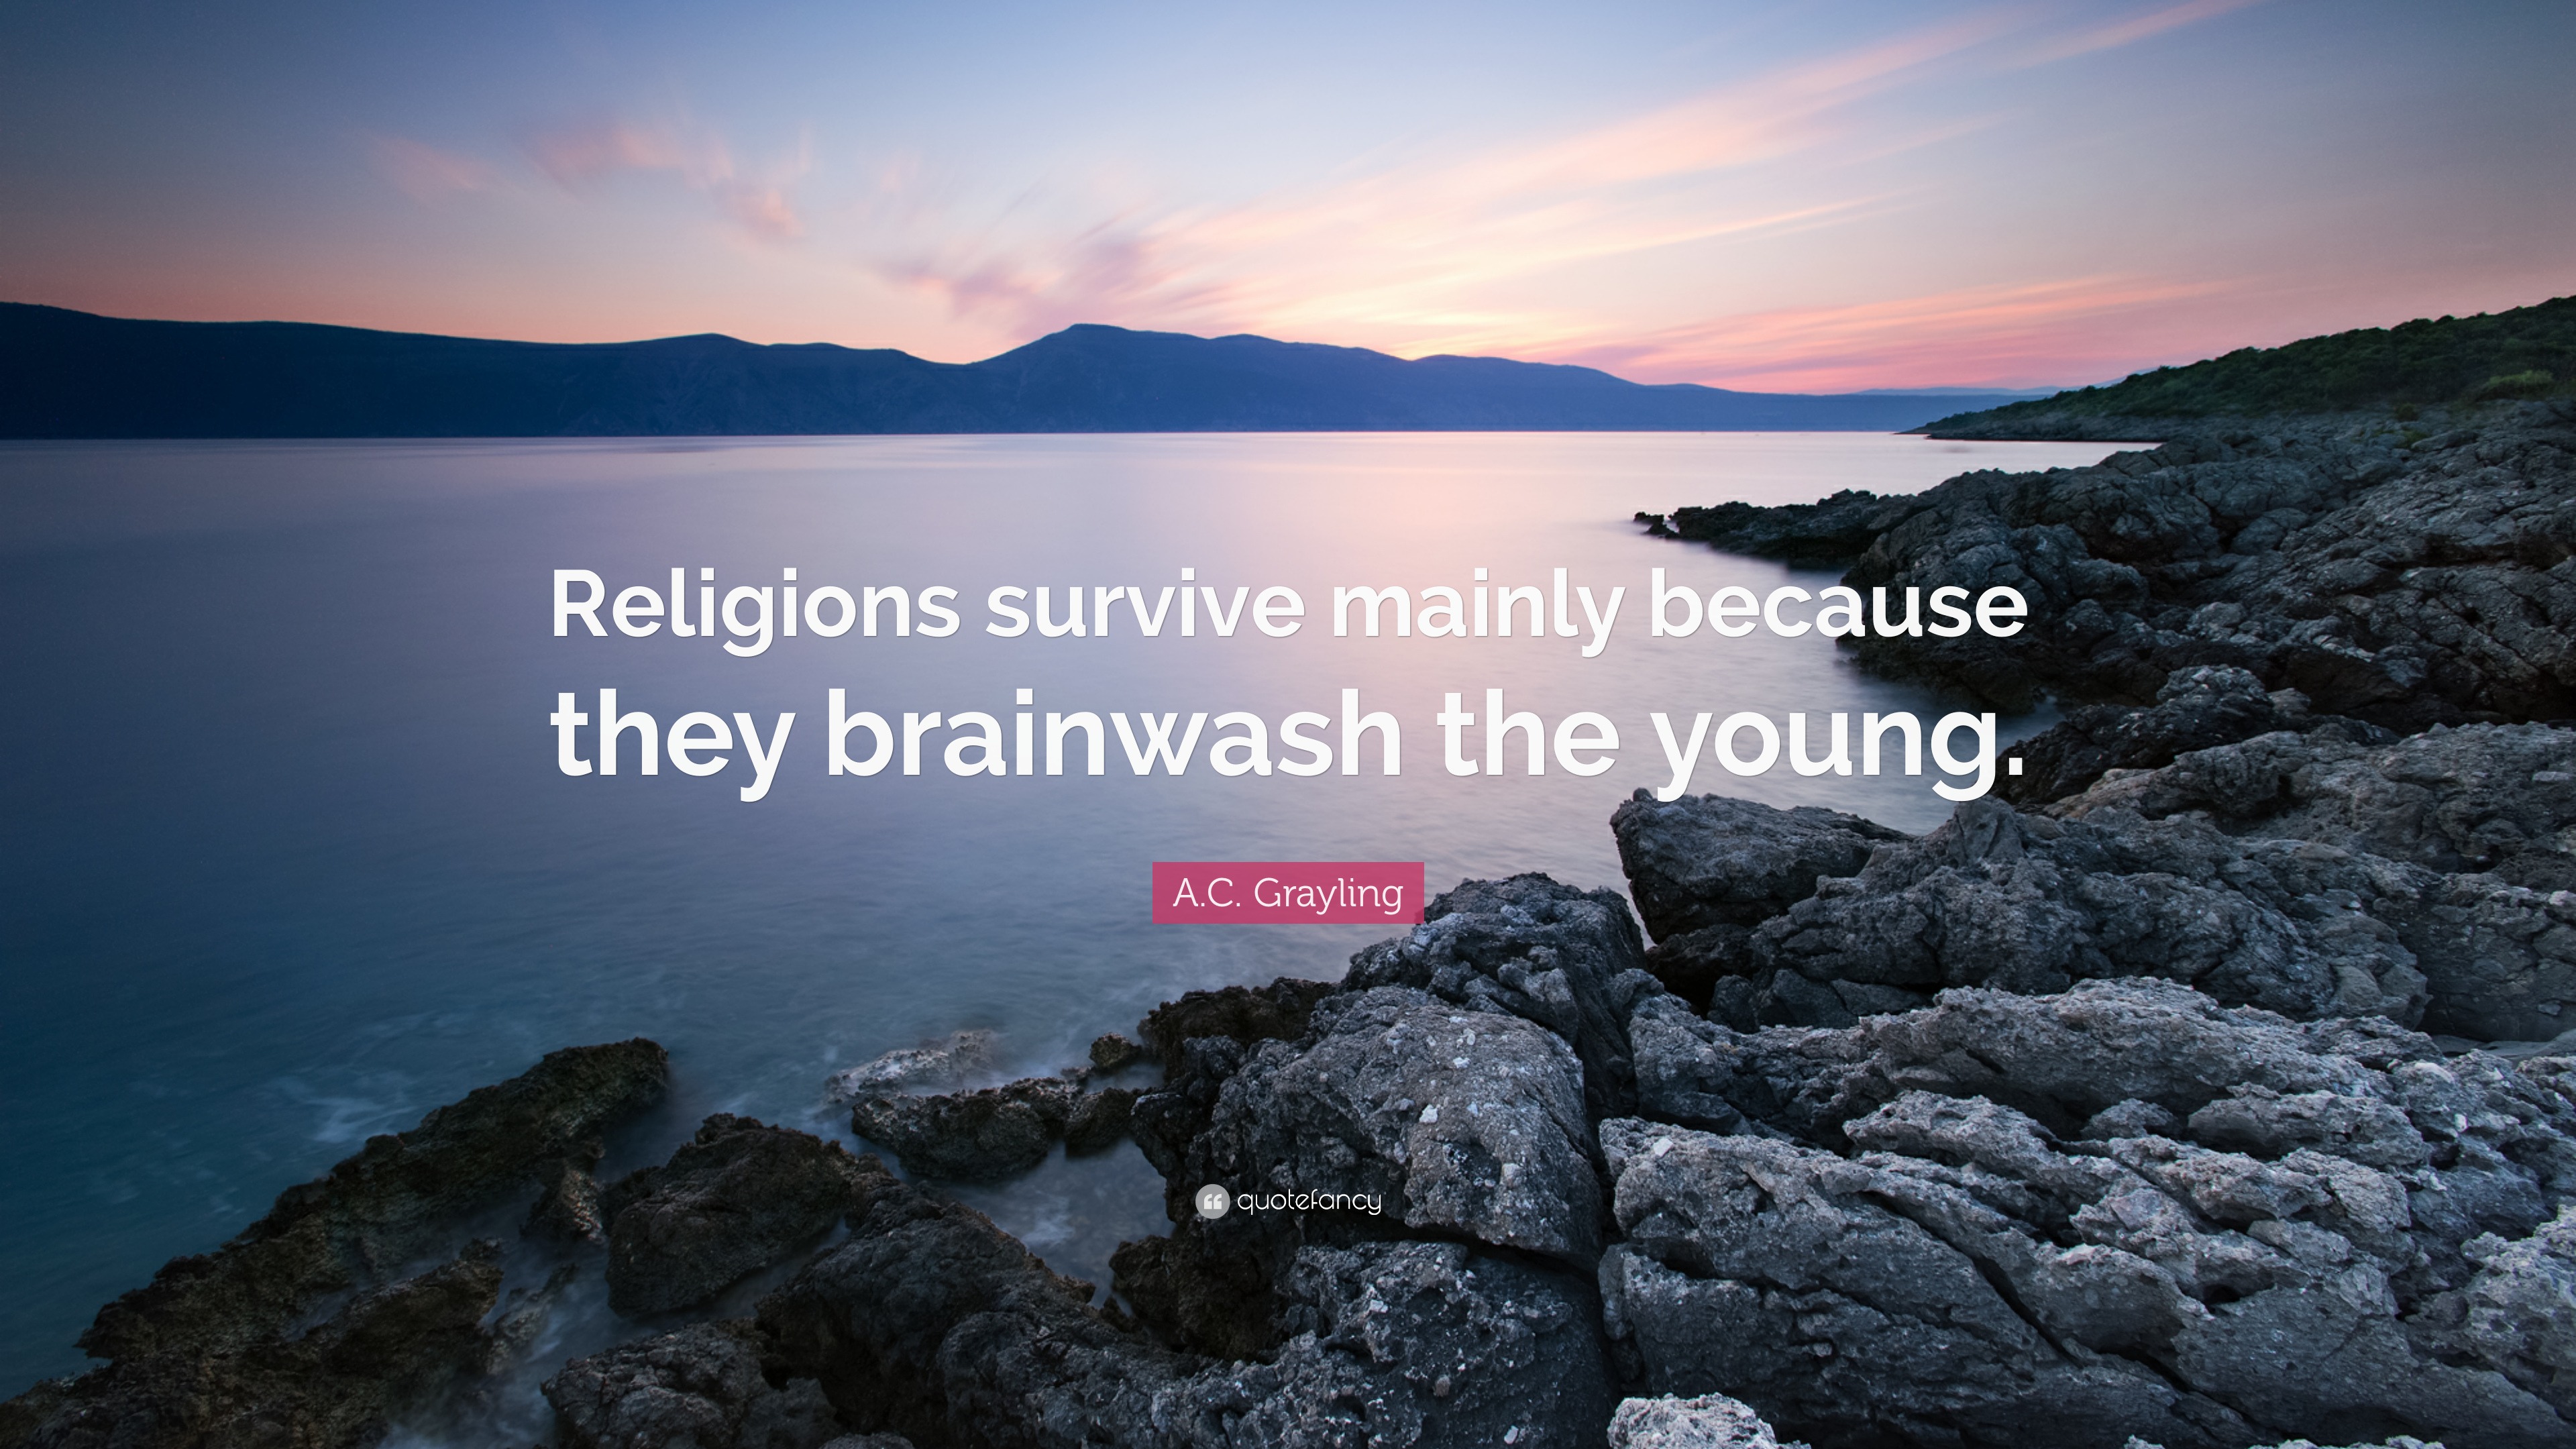 A.C. Grayling Quote: “Religions survive mainly because they brainwash the  young.”